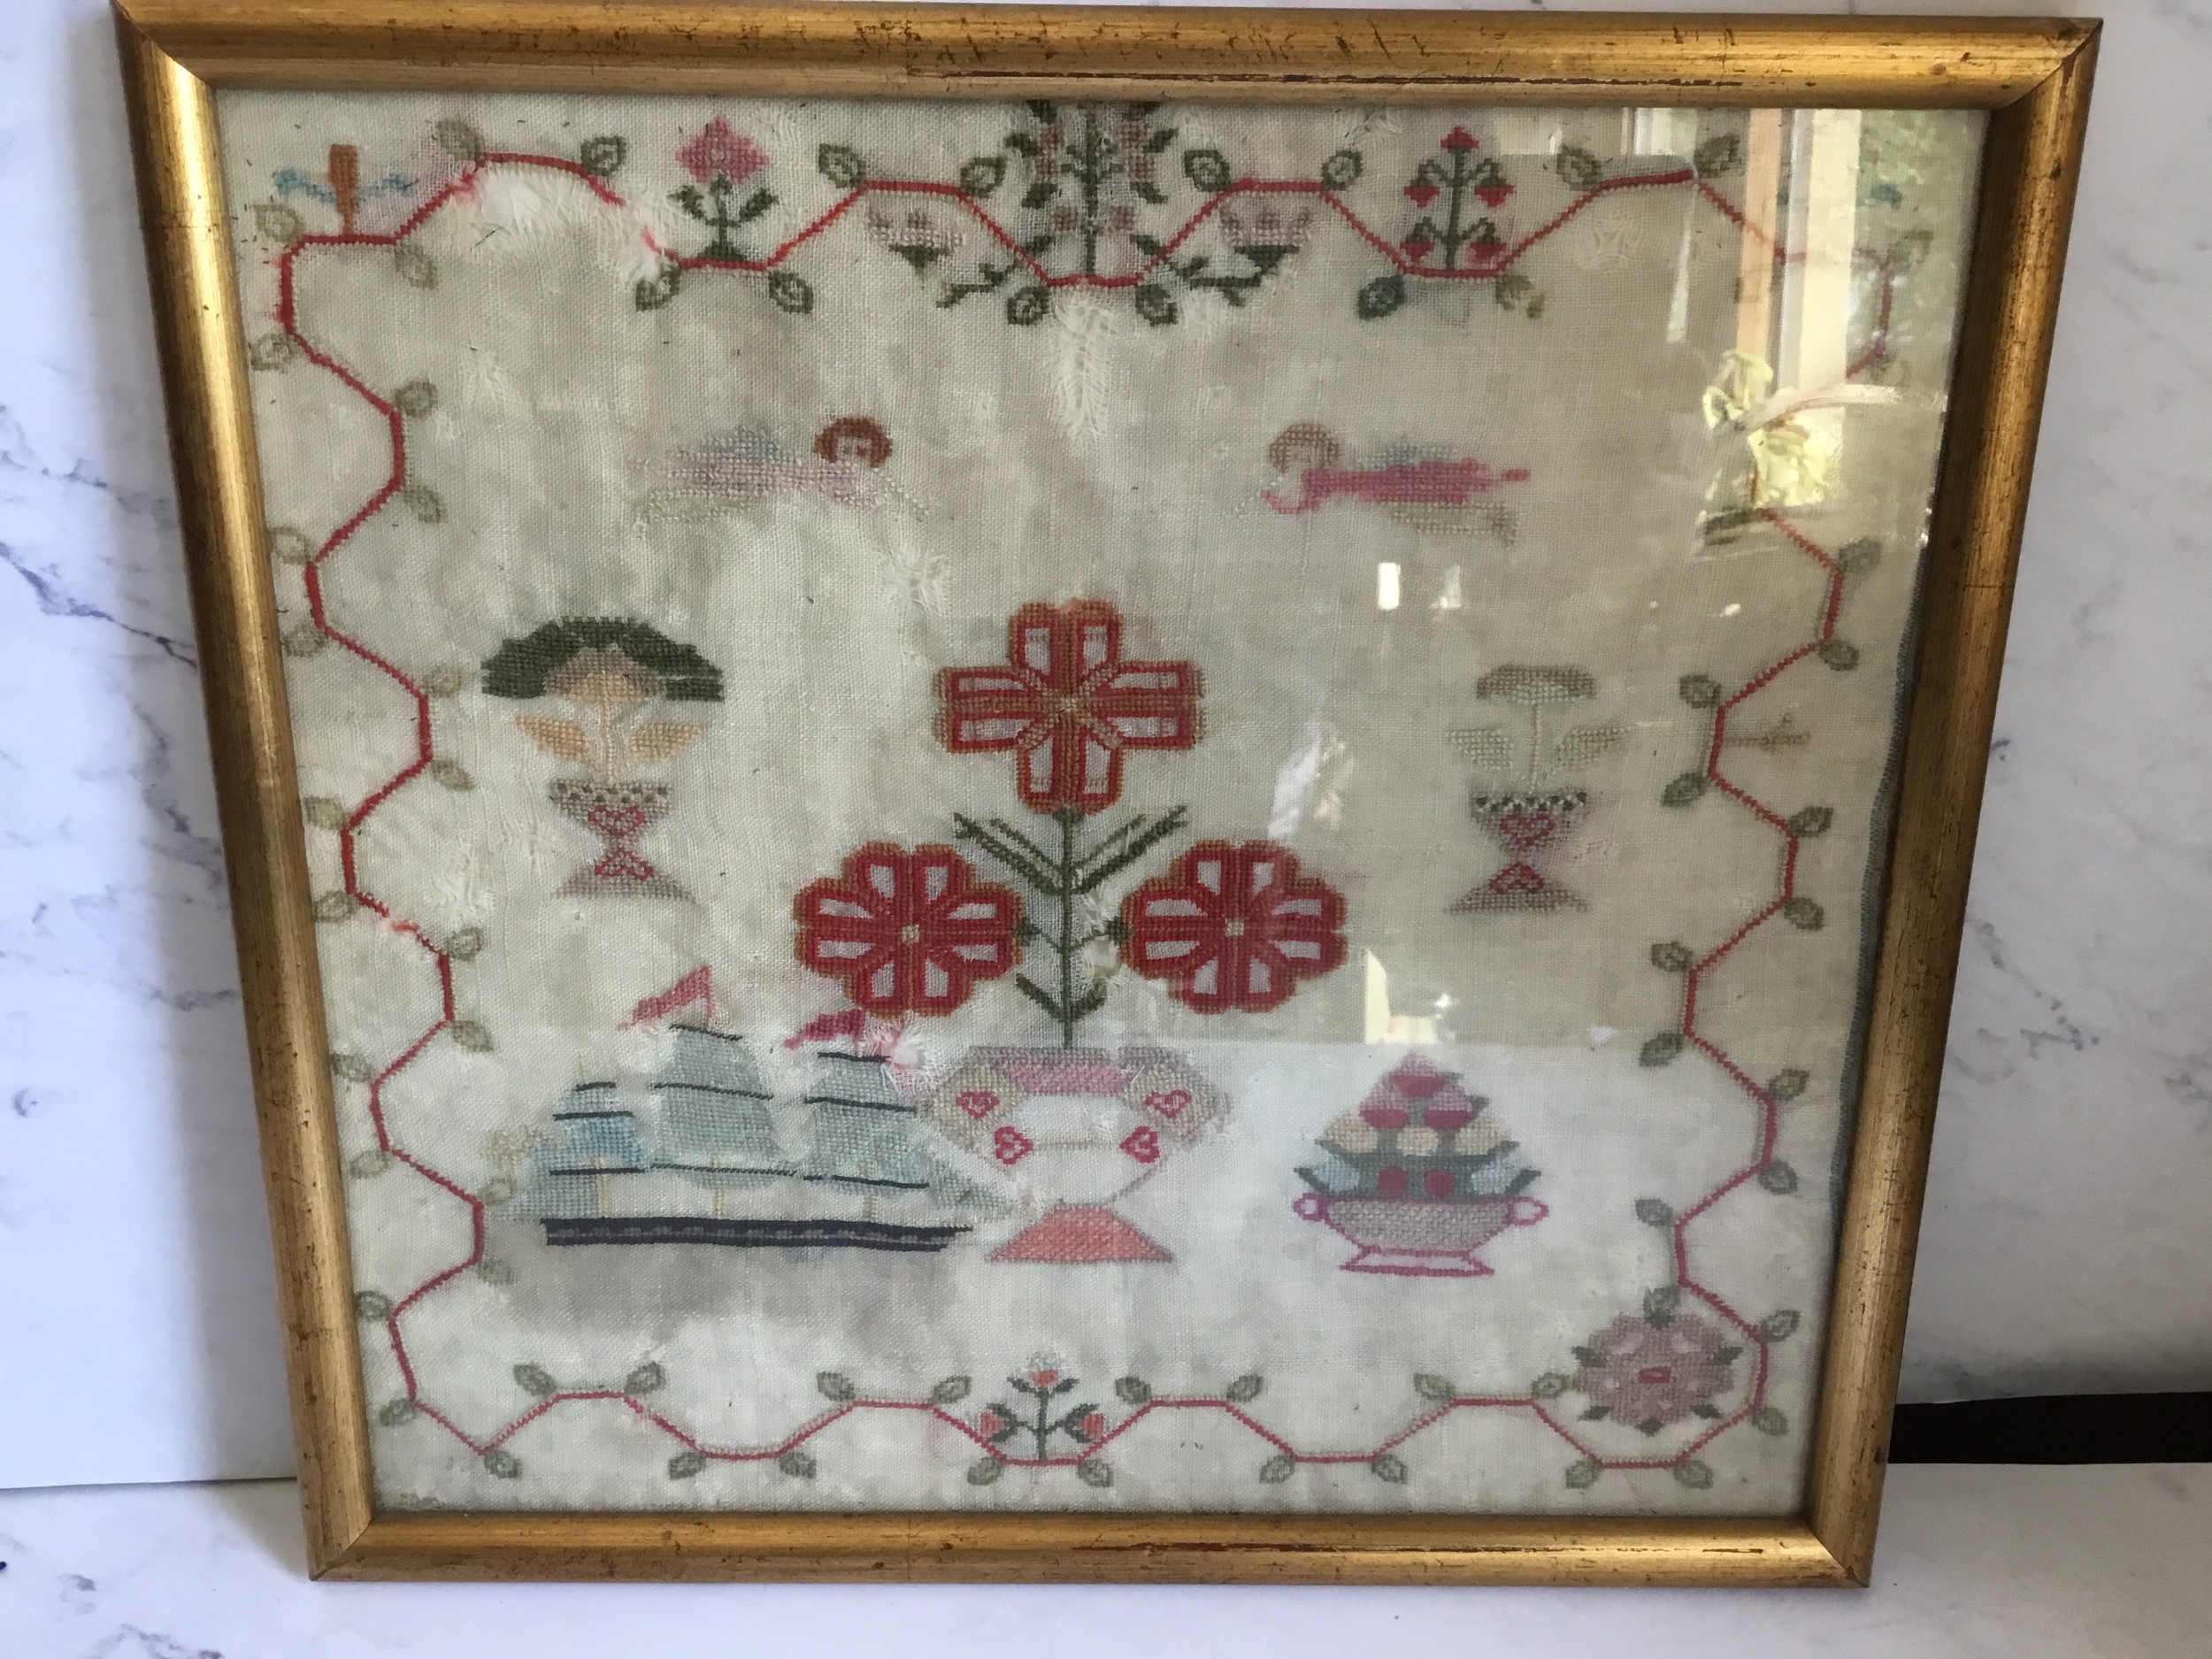 A Victorian Marine needlework sampler, embroidered with 3 masted ship, stylised flowers and